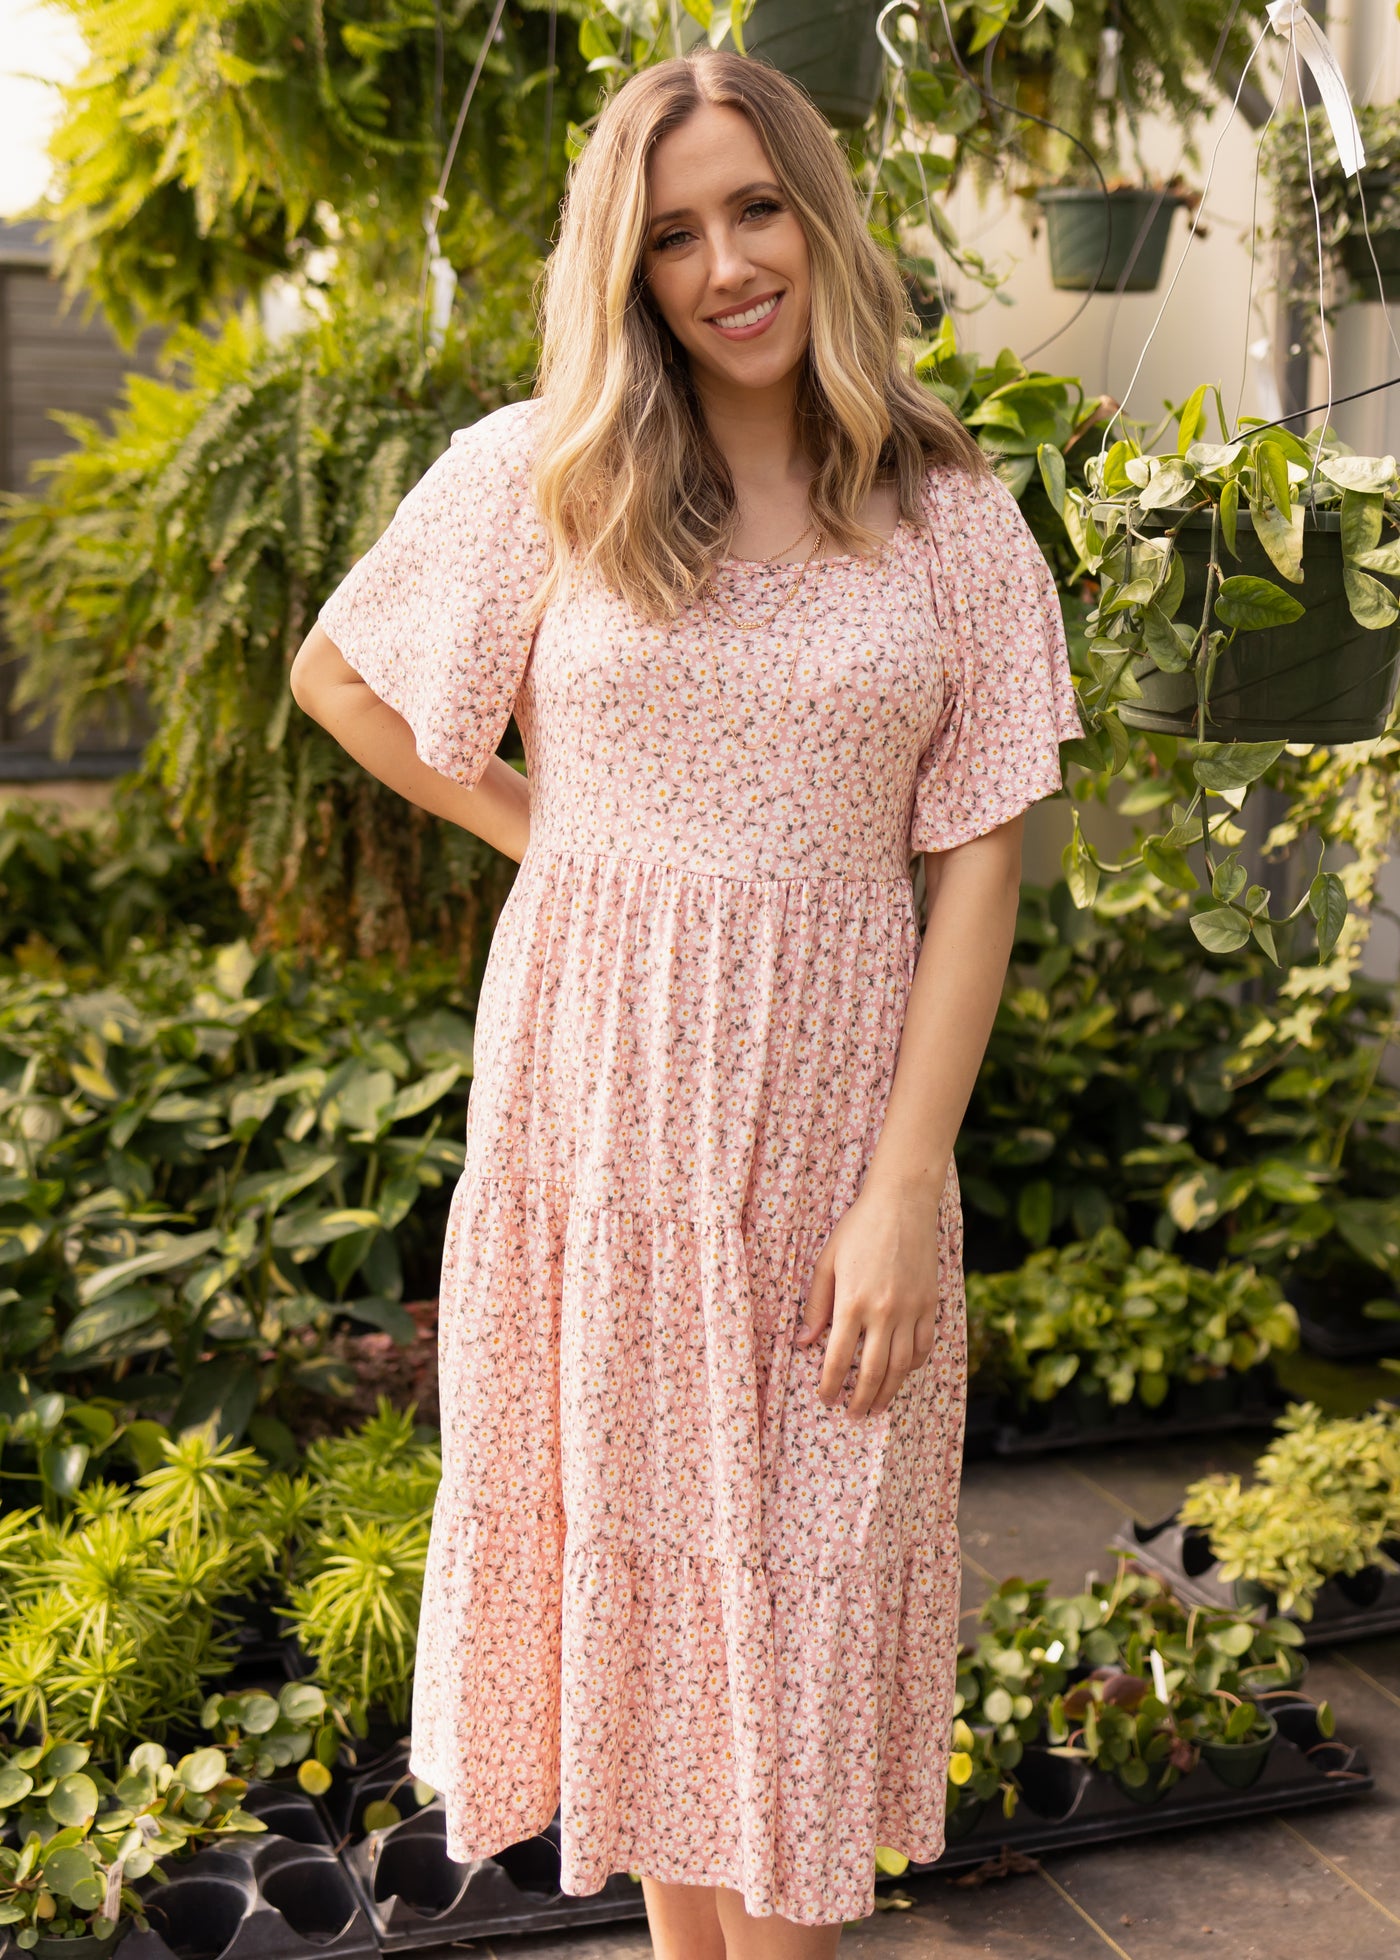  Blush floral dress with white floral pattern